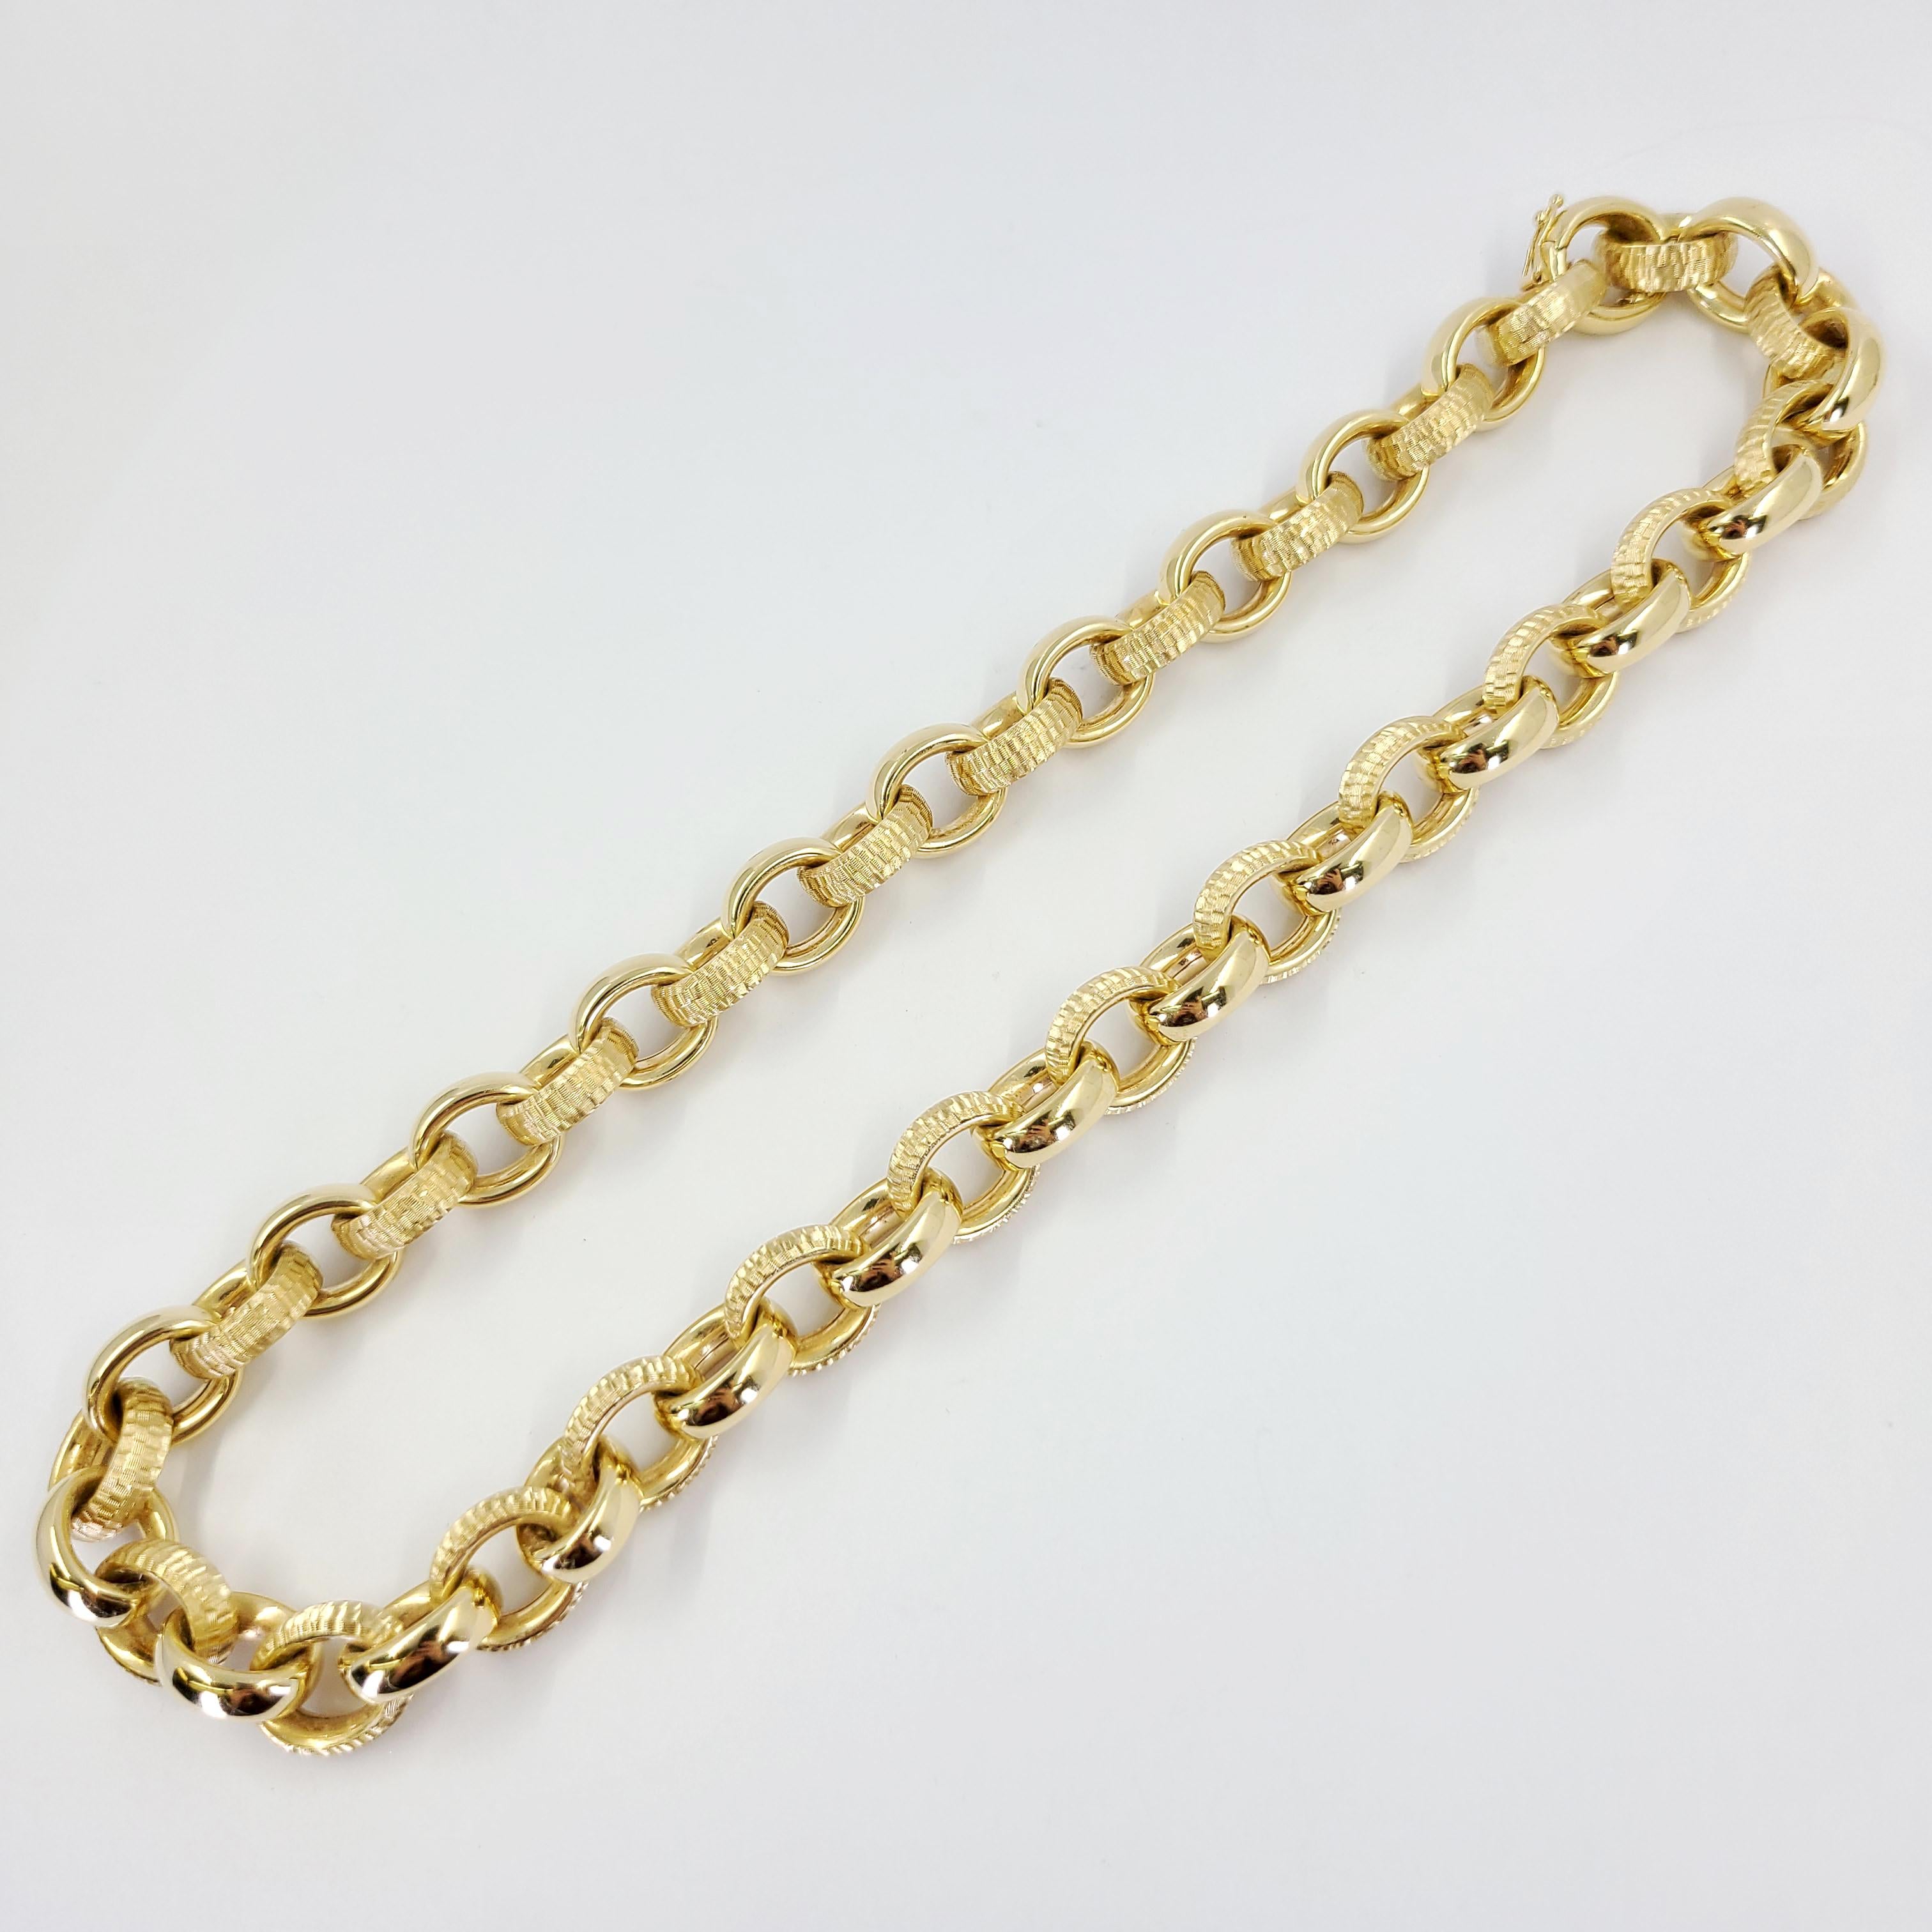 14 Karat Yellow Gold Oval Link Necklace Featuring Textured Design. 18 Inches Long. Finished Weight Is 79.5 Grams. Matching Bracelet Available.